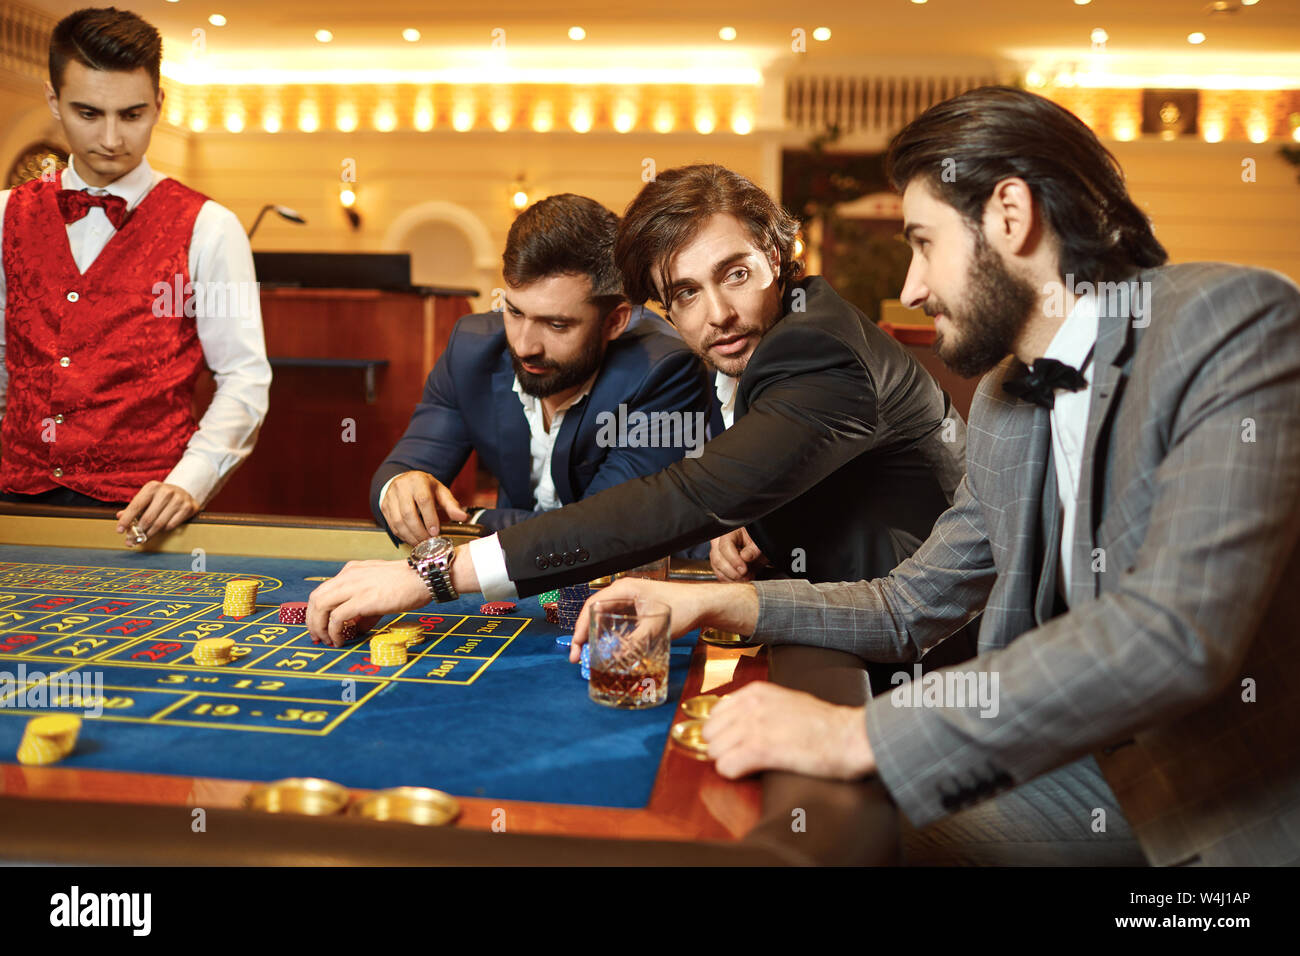 Group man gambler in a suit at table roulette playing poker at a casino. Stock Photo